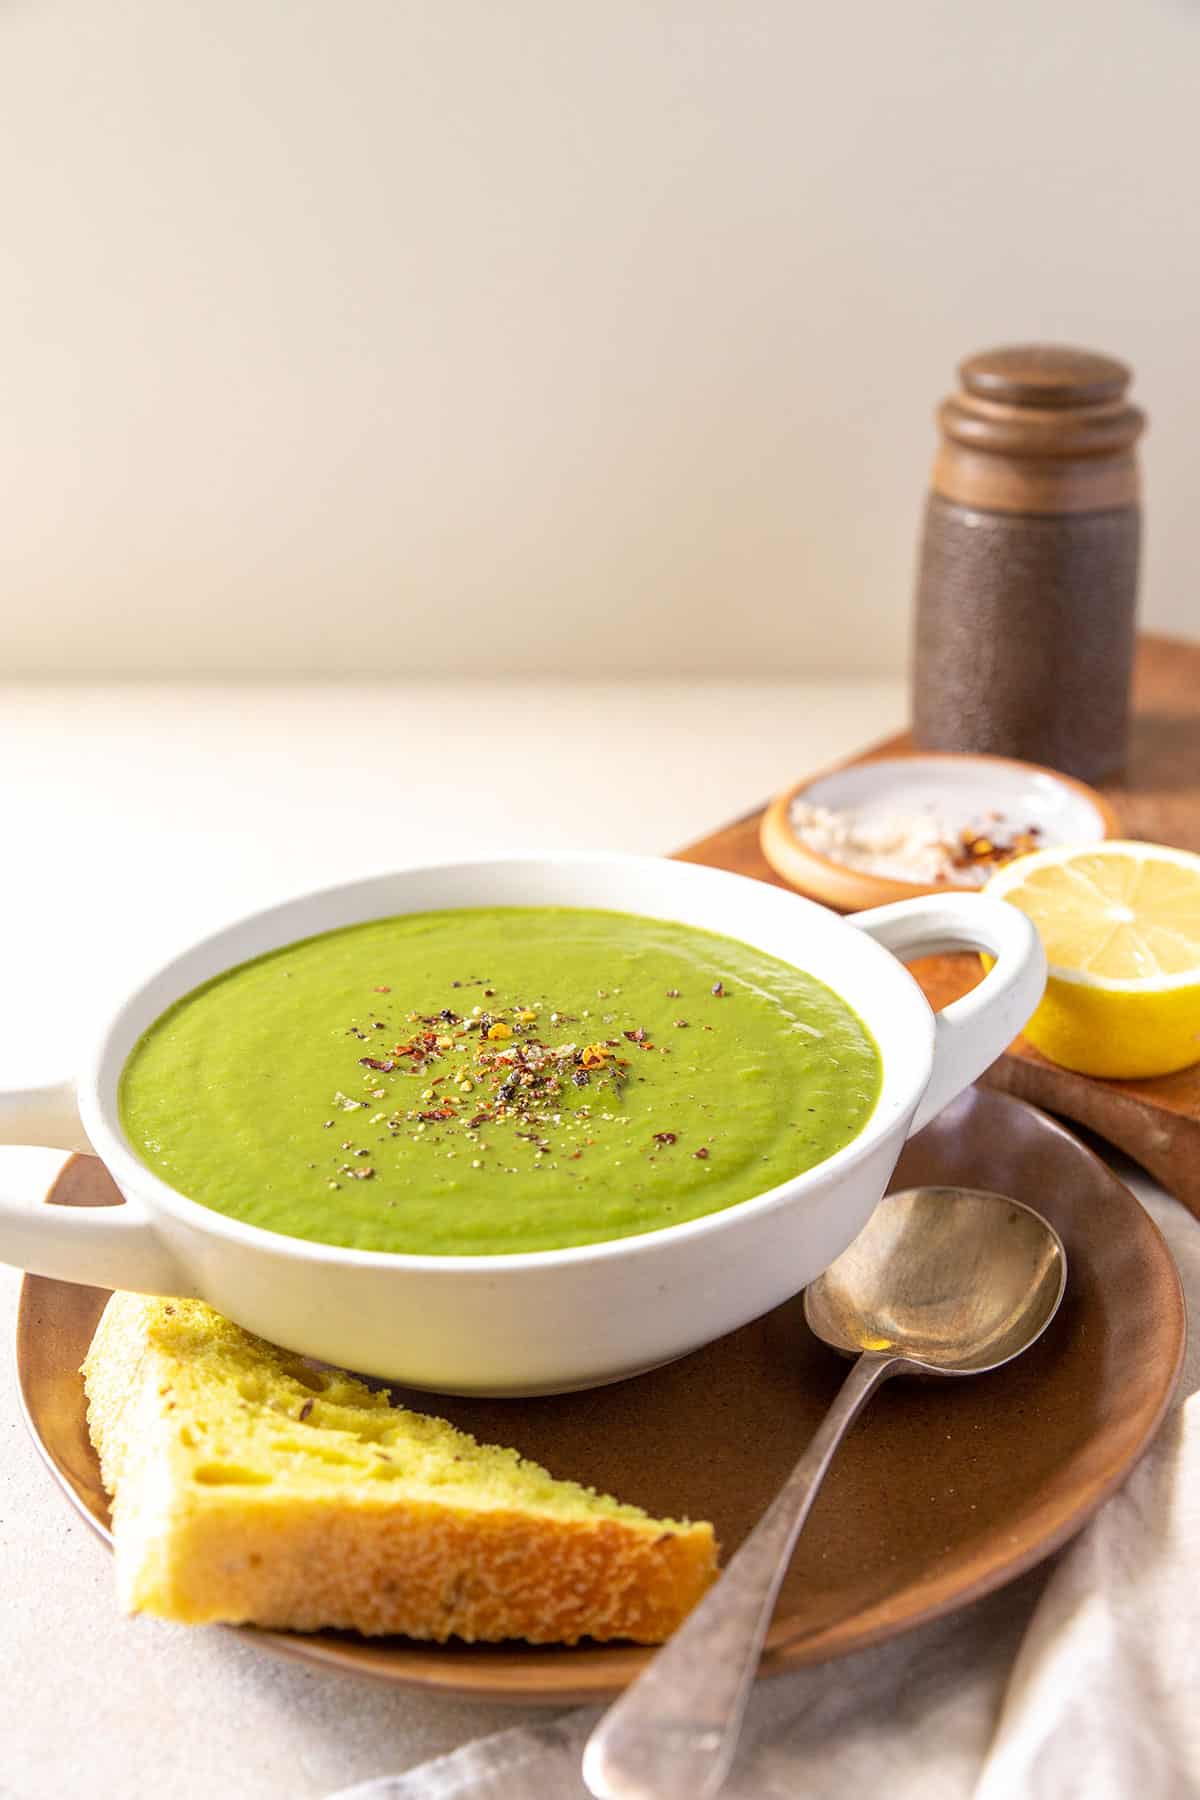 A white bowl of bright green broccoli soup, sitting on a brown plate with a slice of bread beside it. In the background is a board with half a lemon, a dish of salt and chilli flakes, and a pepper shaker. 